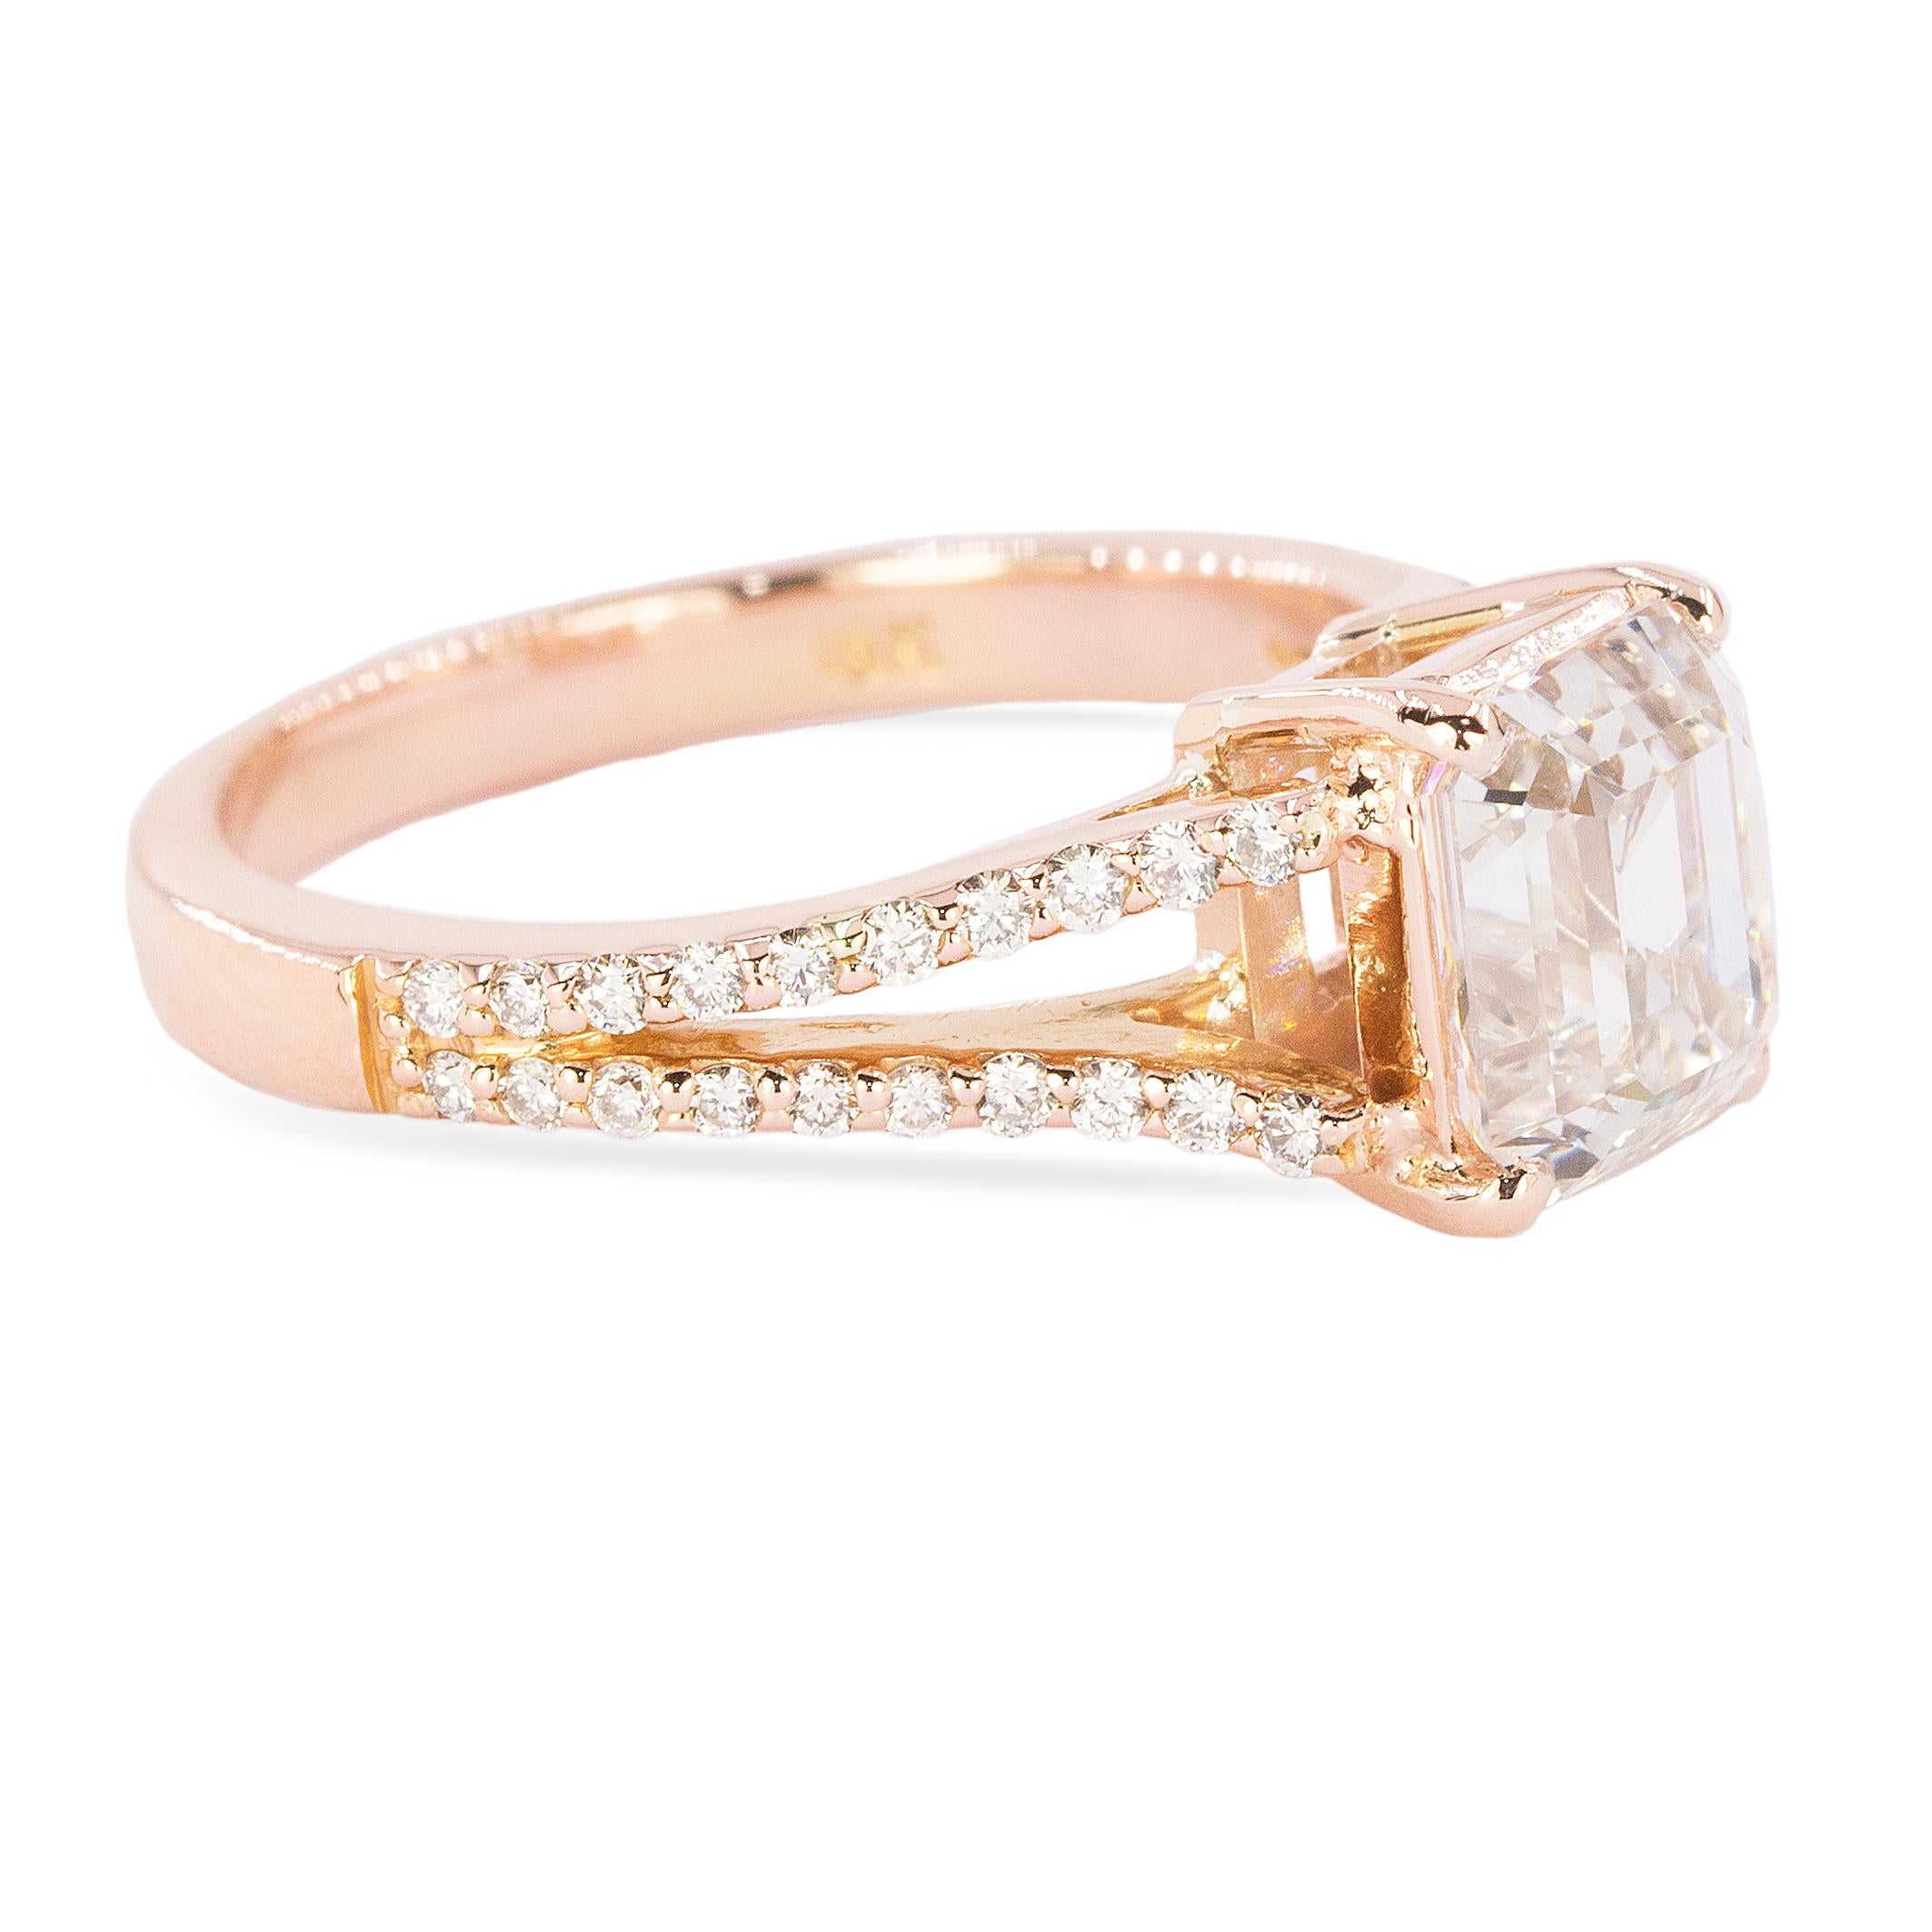 18 Karat Rose Gold Ring with 2.02 Carat GIA Certified Emerald Cut Diamond In New Condition For Sale In Sarasota, FL